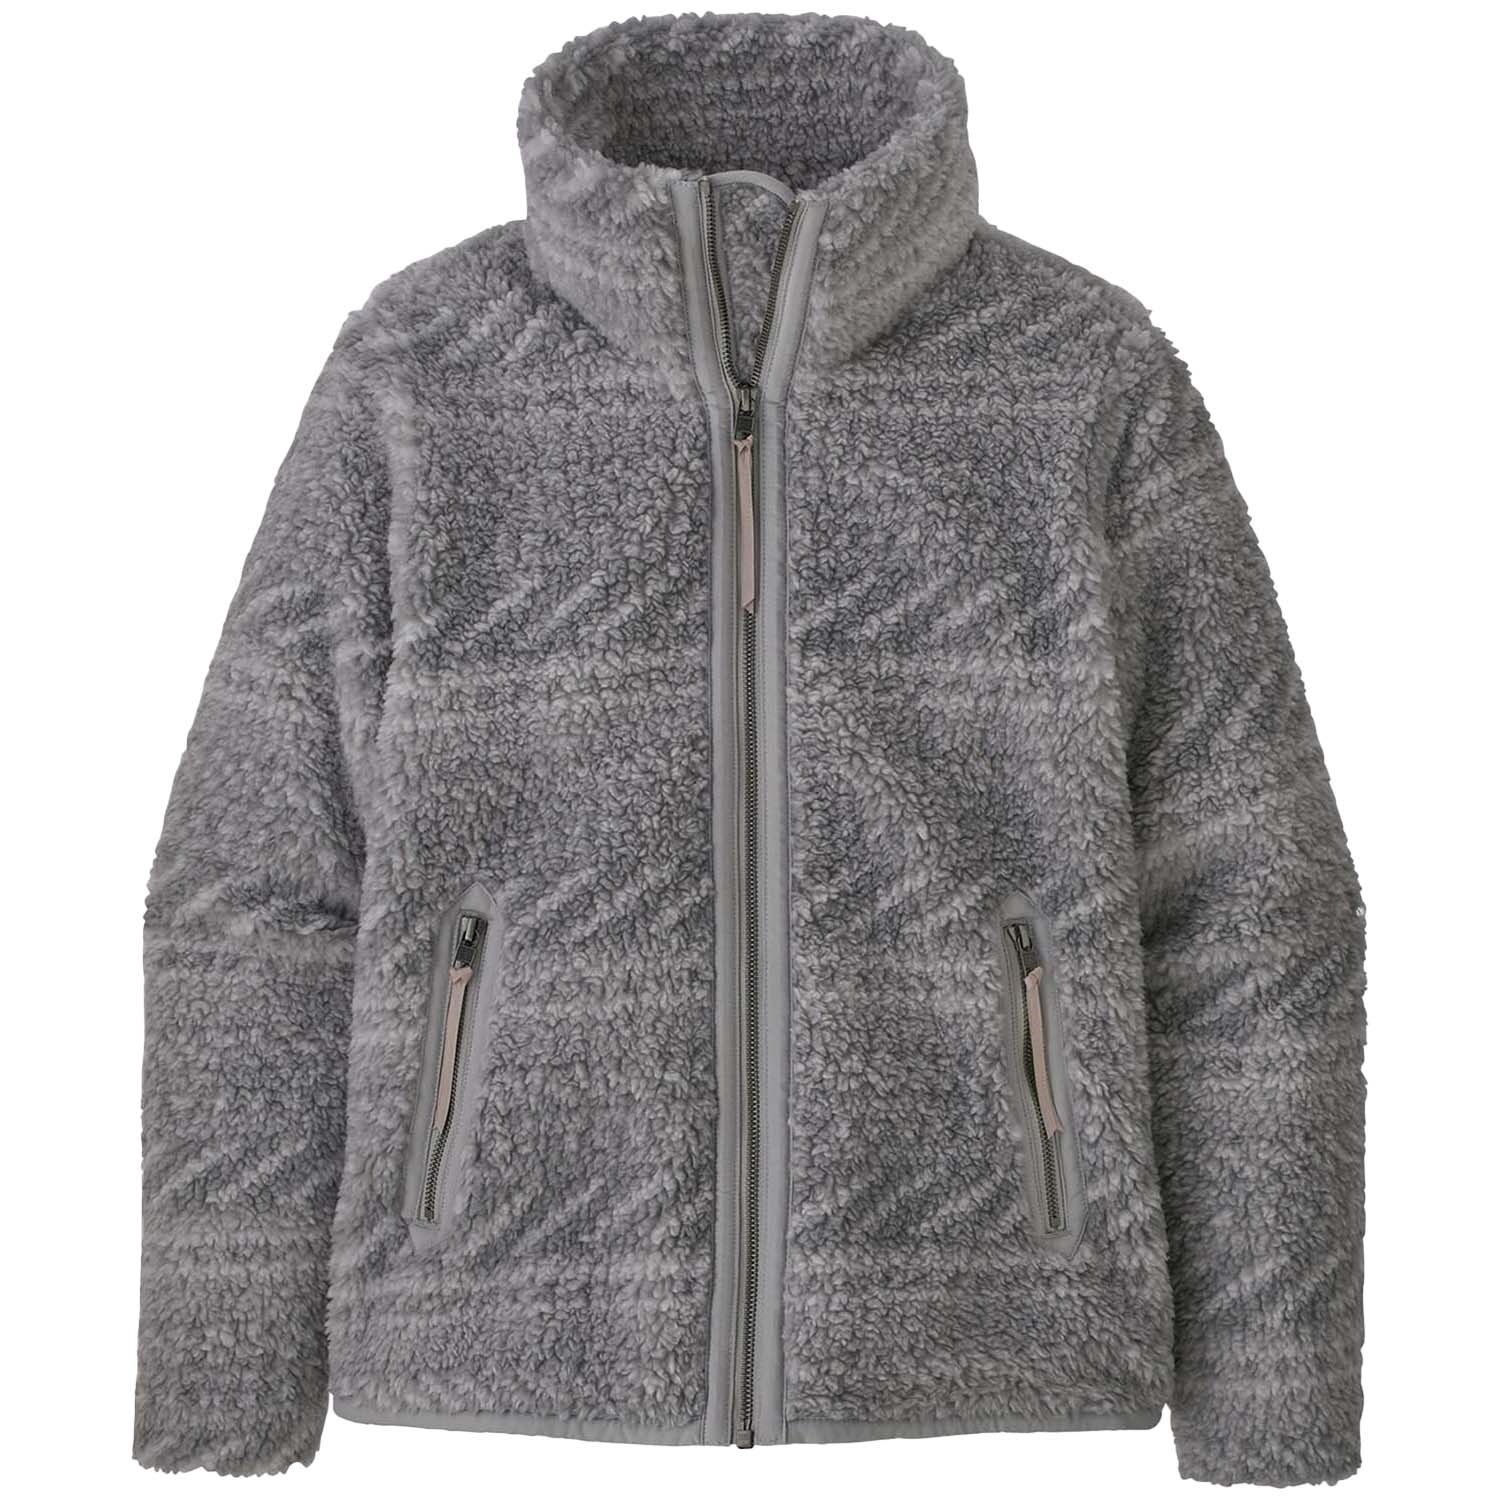 Patagonia Divided Sky Jacket Women's | evo